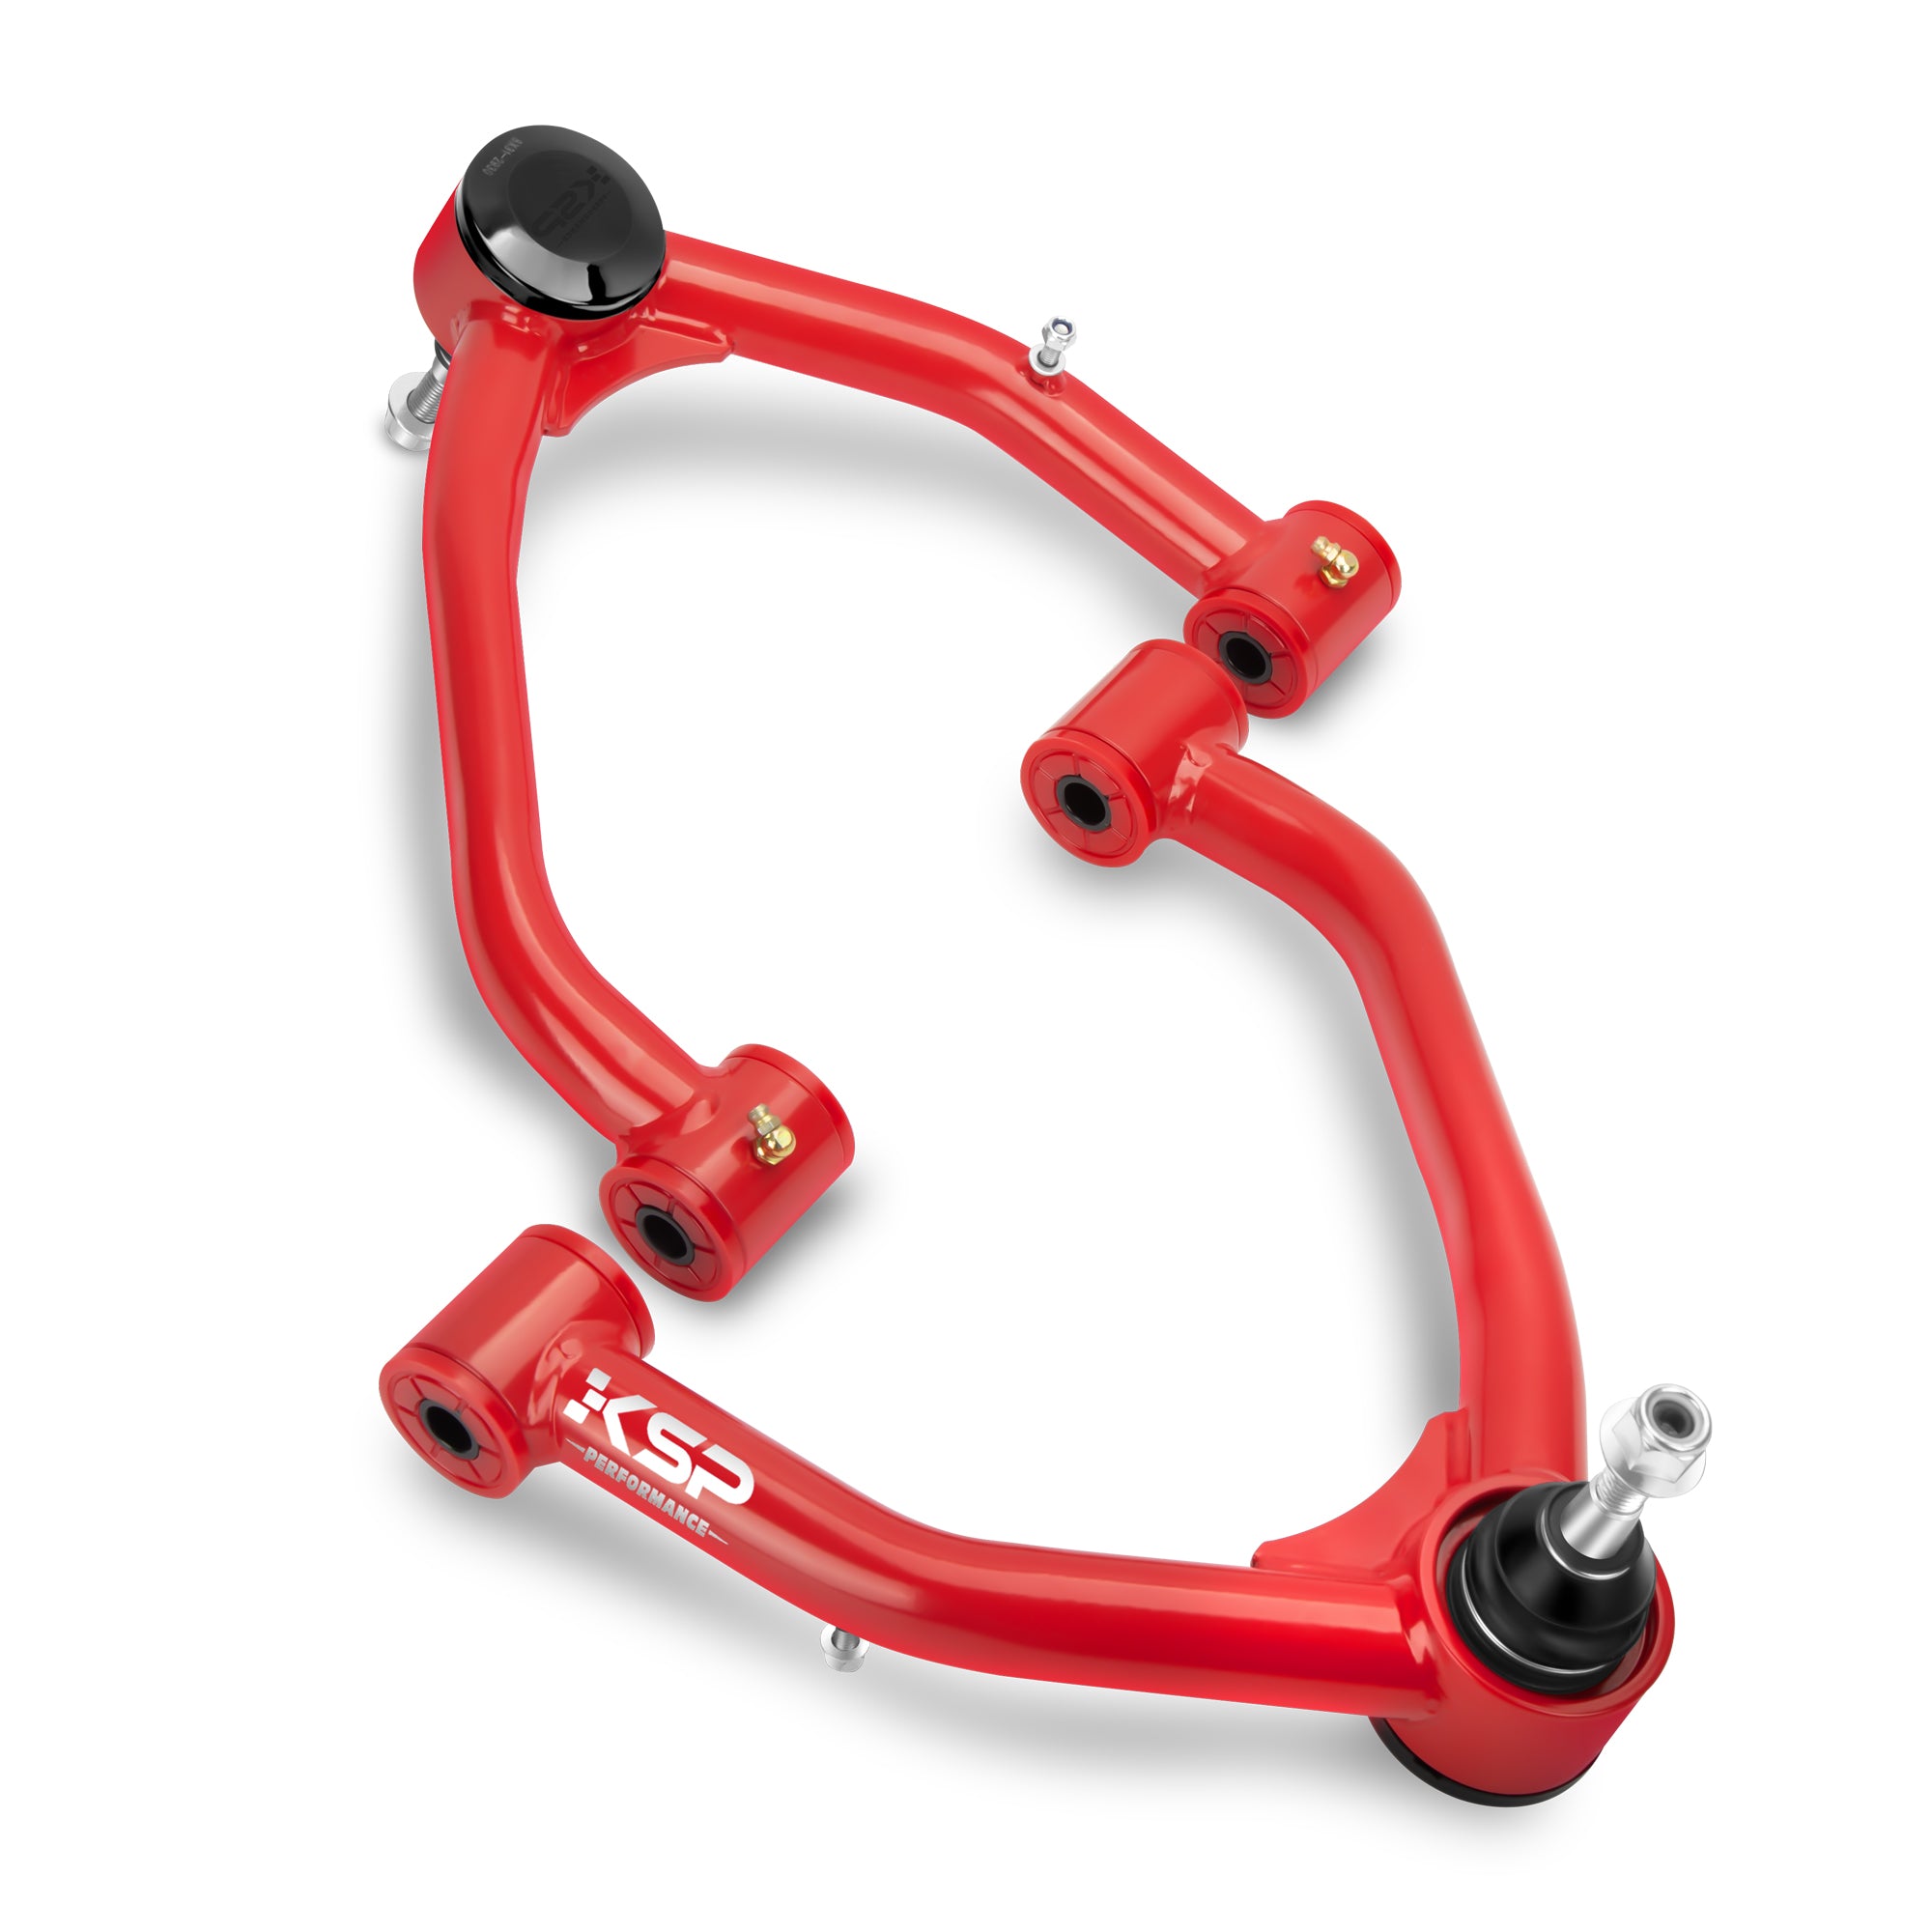 KSP OE Upgrade Front Upper Control Arms Replace Part# RK80669/70 521023/024 25812725 For 2007-2018 Silverado Sierra 0-2 Inch Lift Chevy GMC Red UCAs